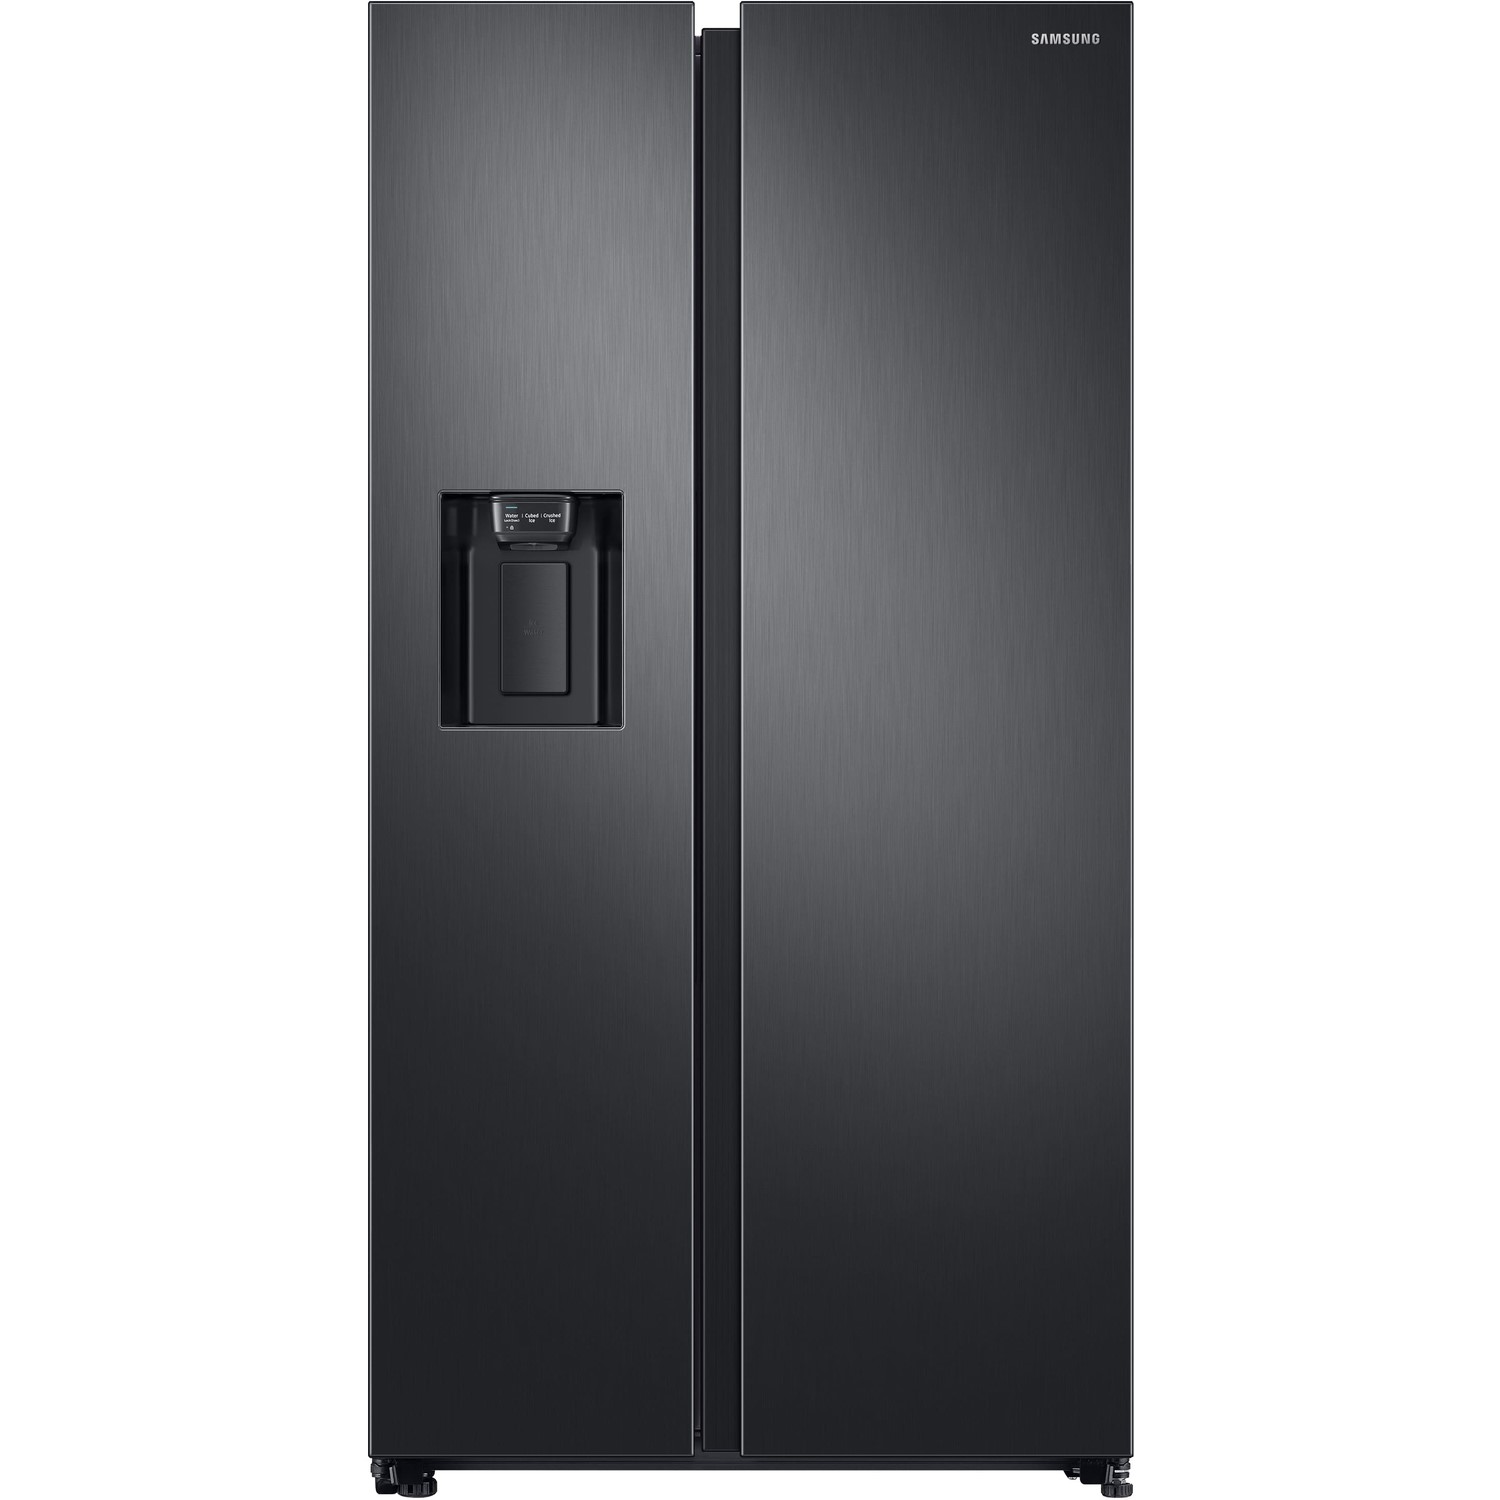 Refurbished Samsung RS68N8230B1 Side-by-side American Fridge Freezer With Ice & Water Dispenser - Bl